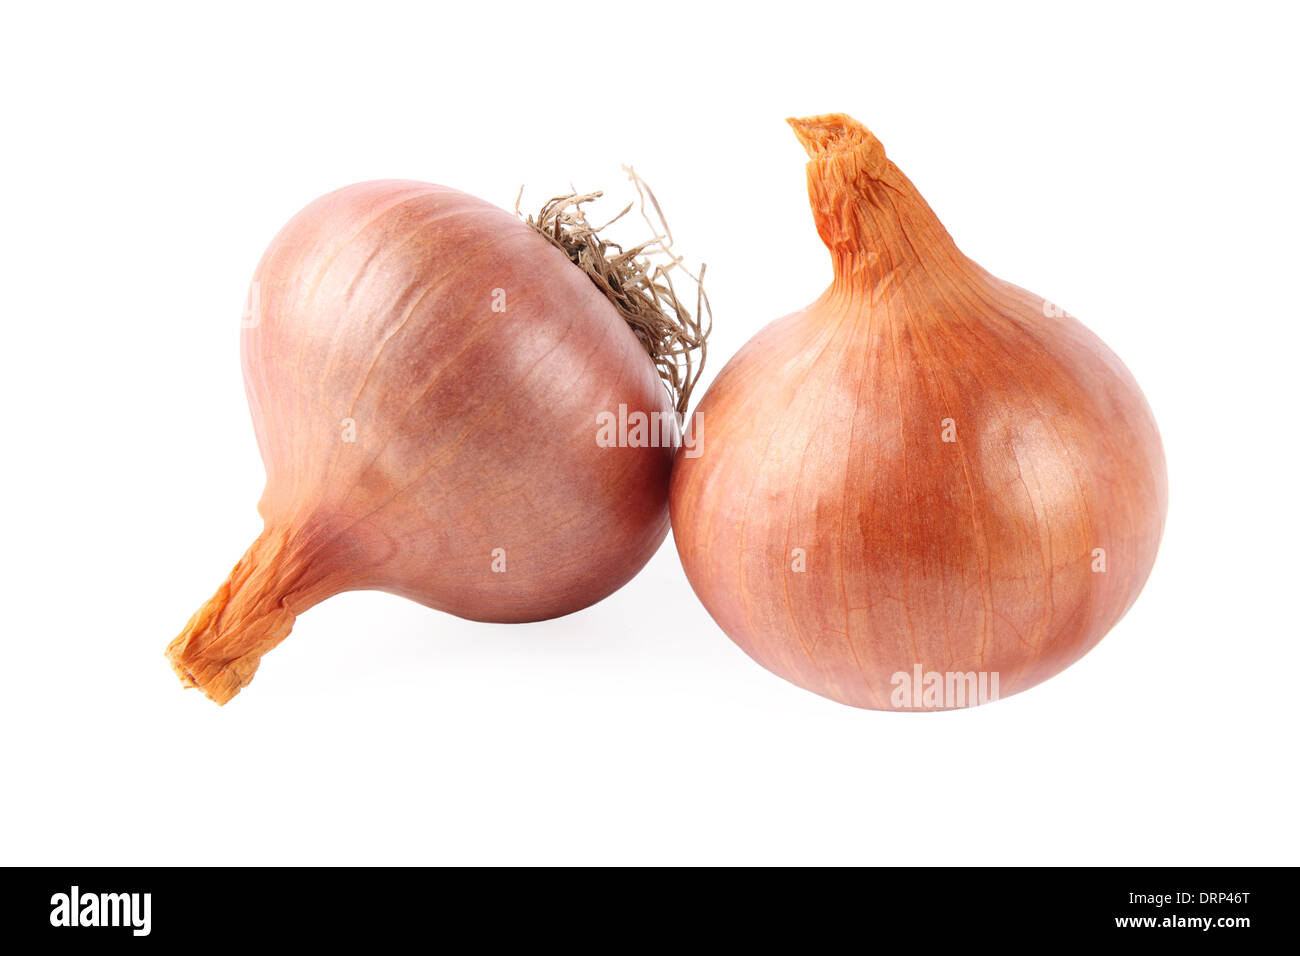 two onions Stock Photo